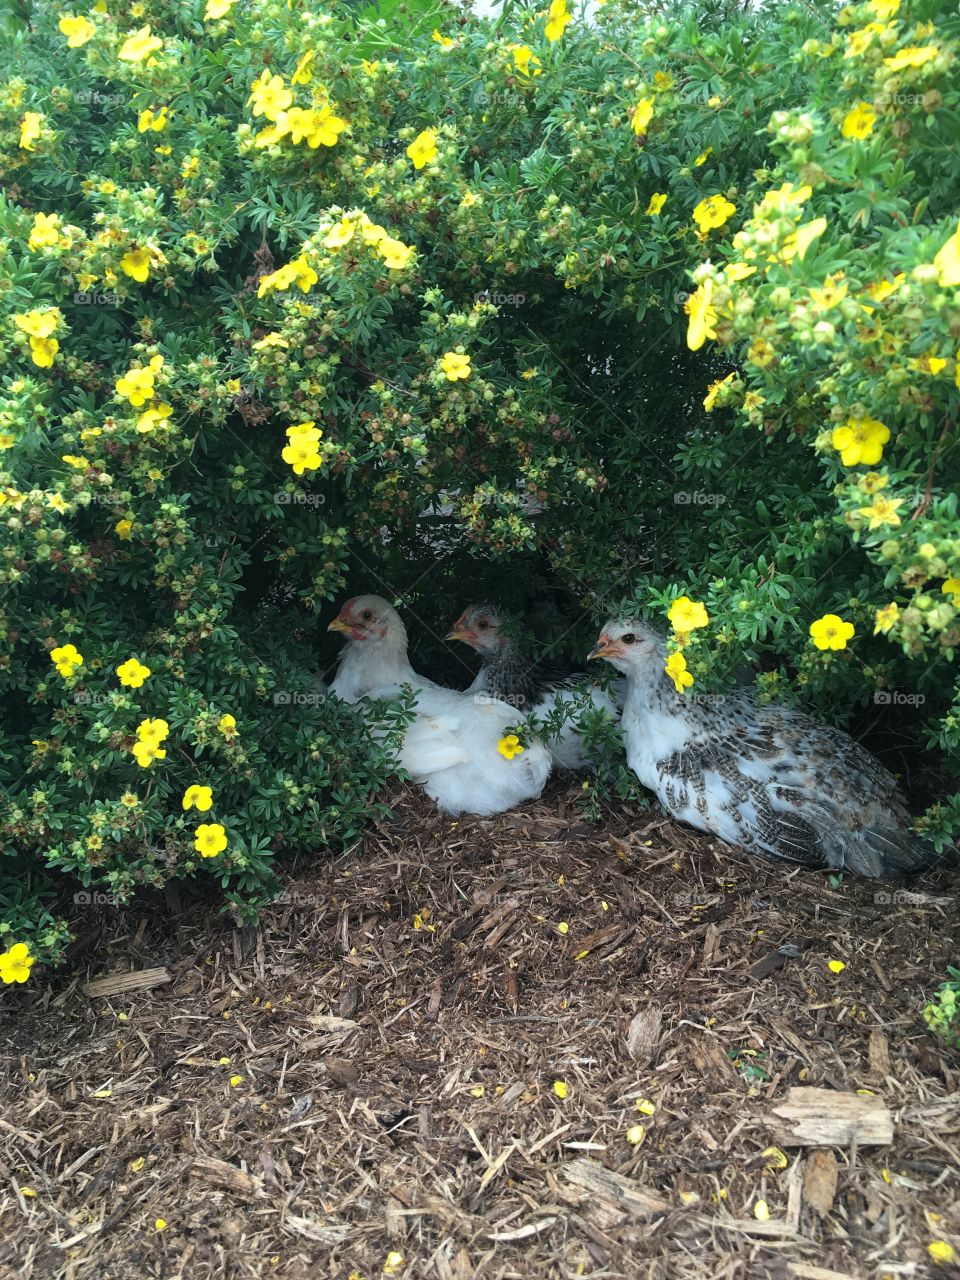 2 months old baby chicks surrounded by yellow flowers.
